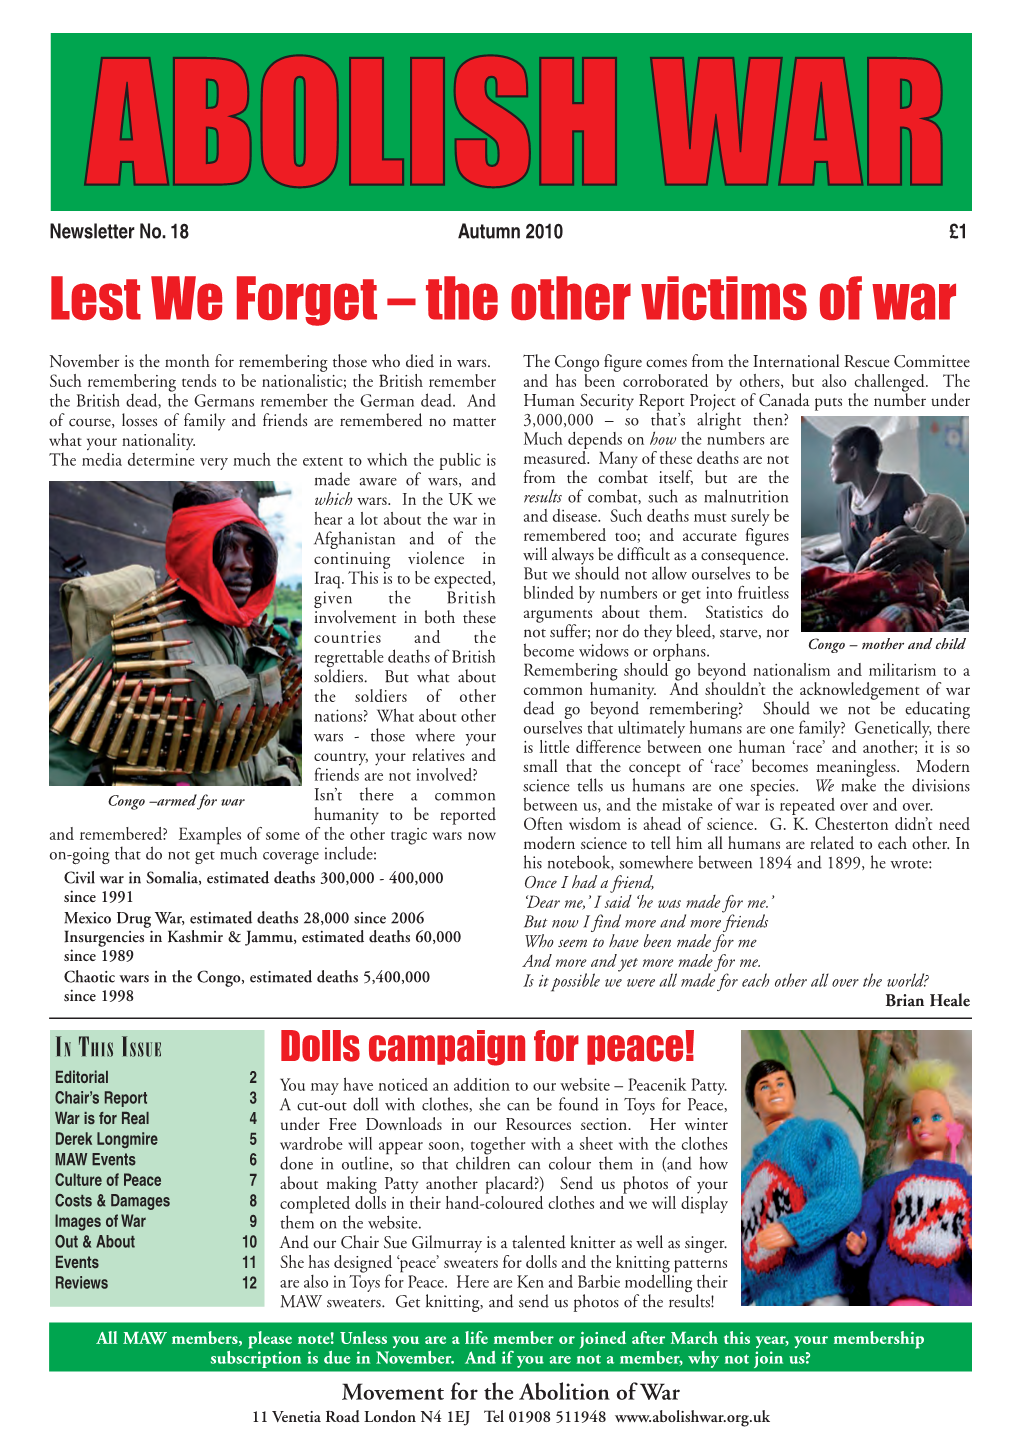 Lest We Forget – the Other Victims of War